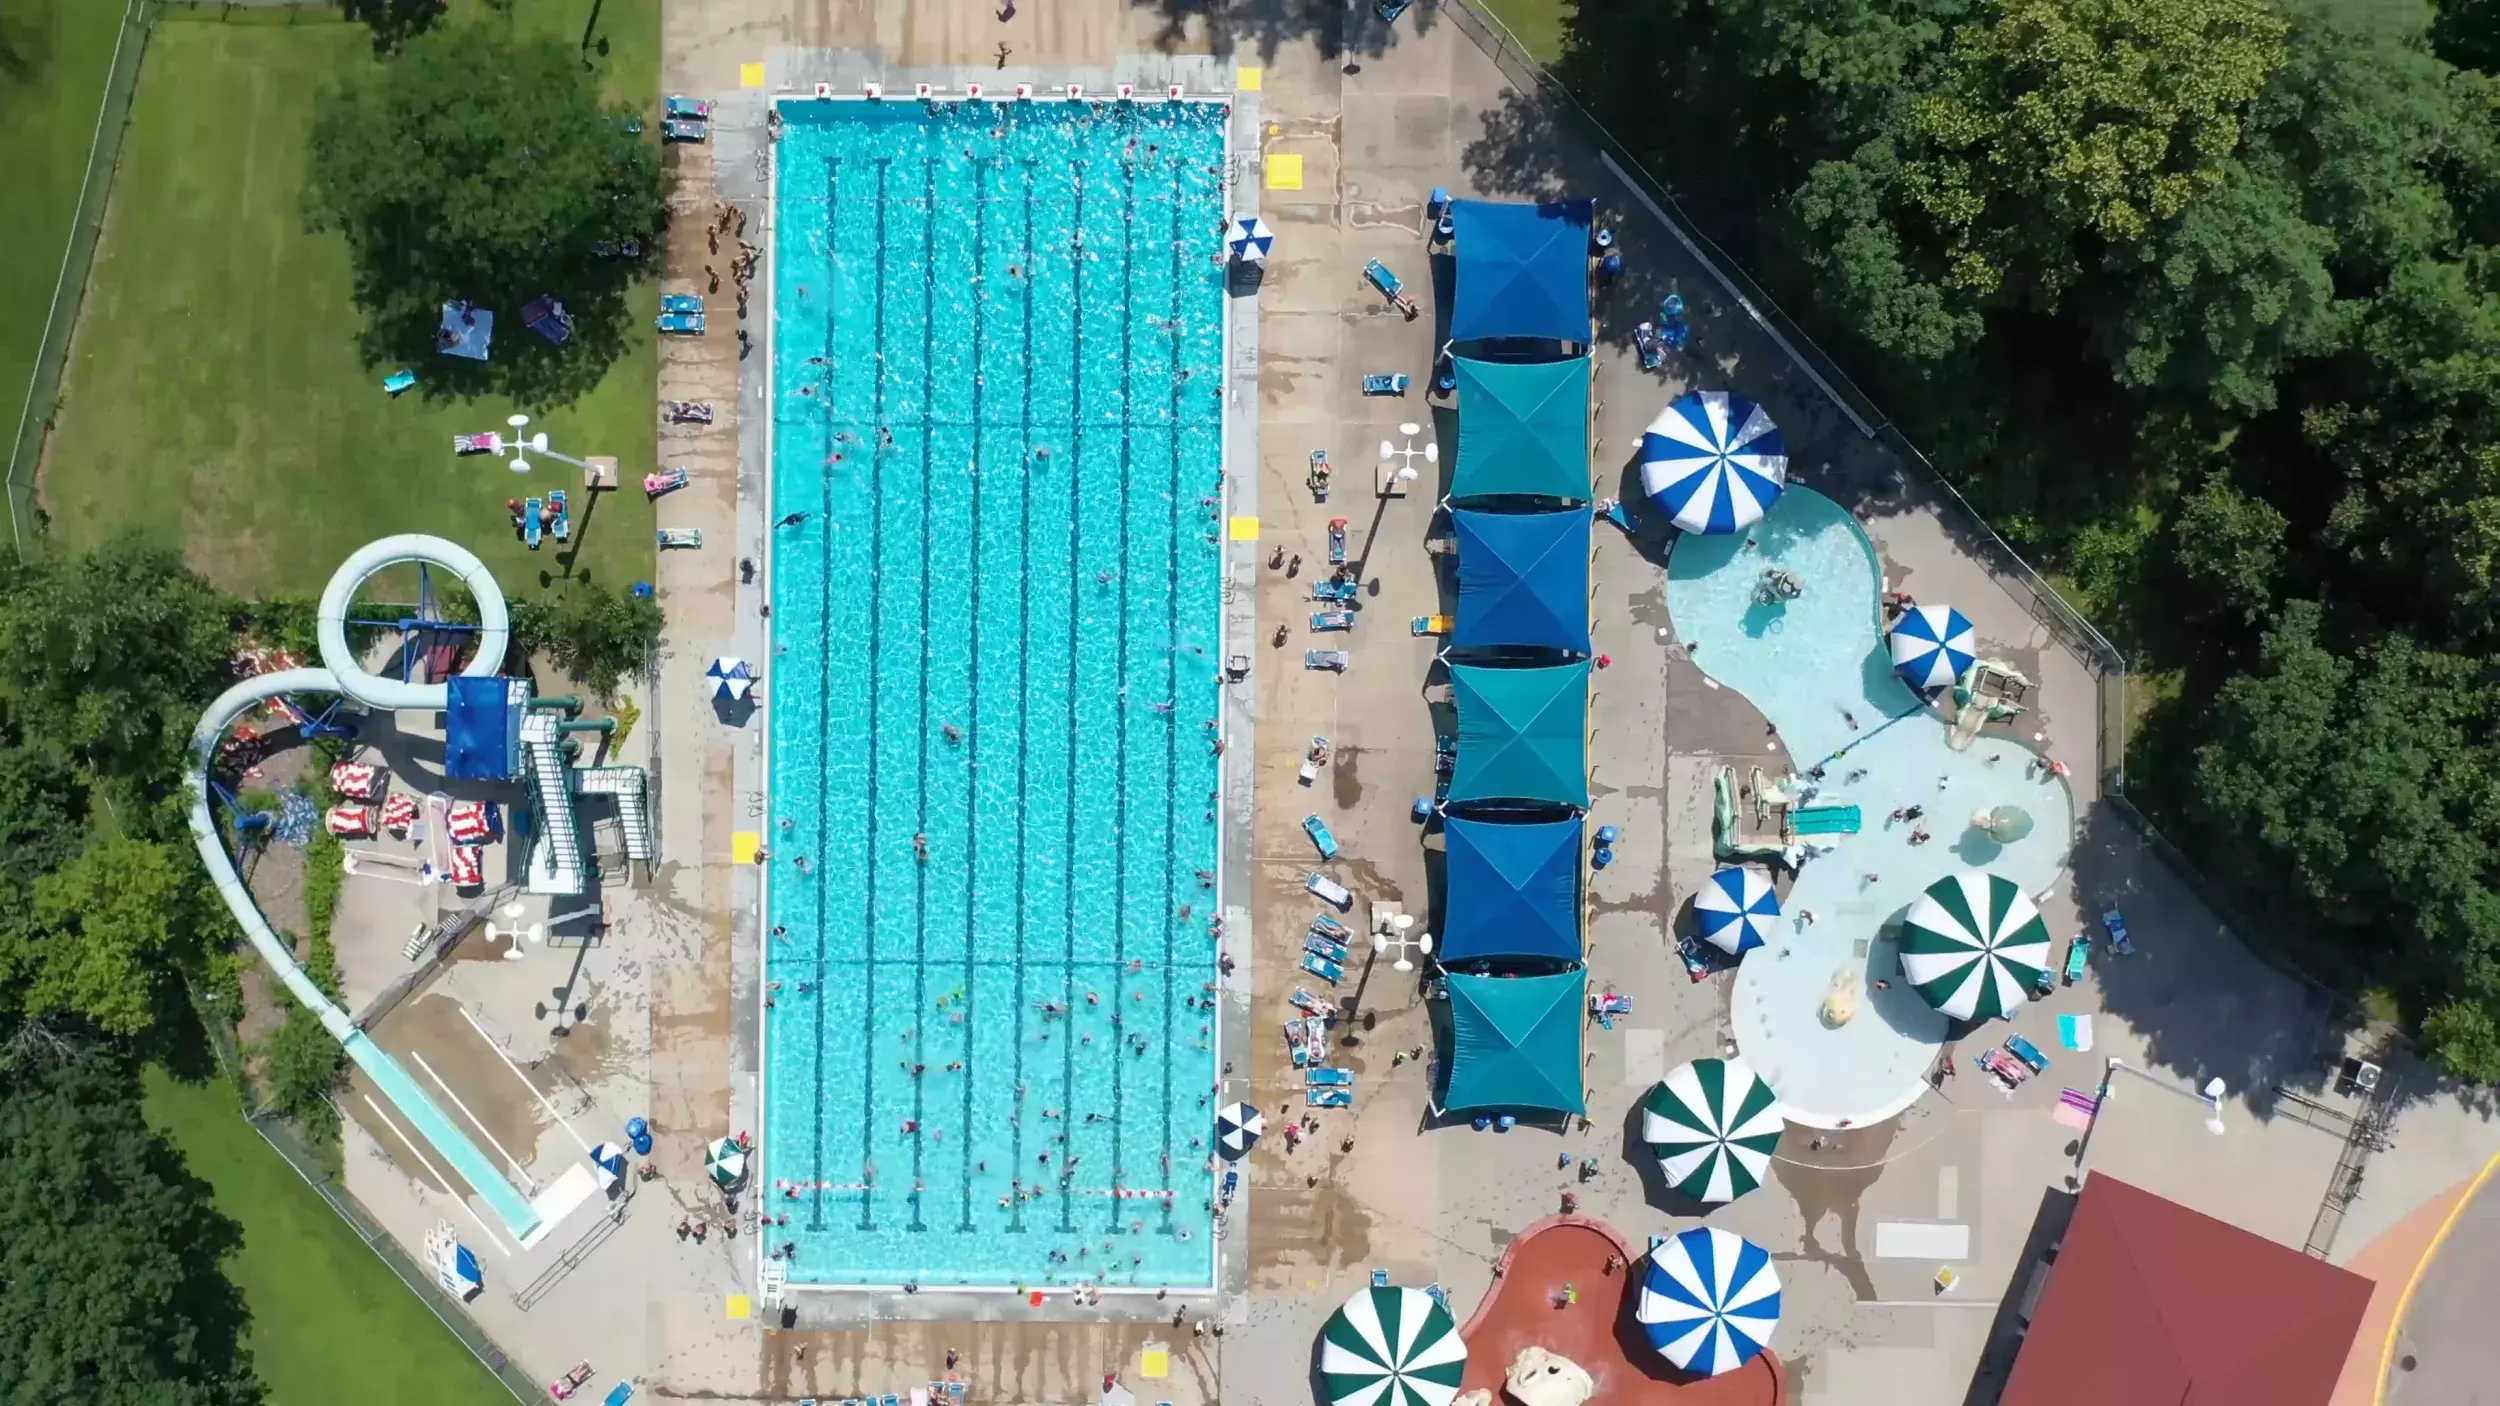 Drone photo of Highland Park Aquatic Center during summer.